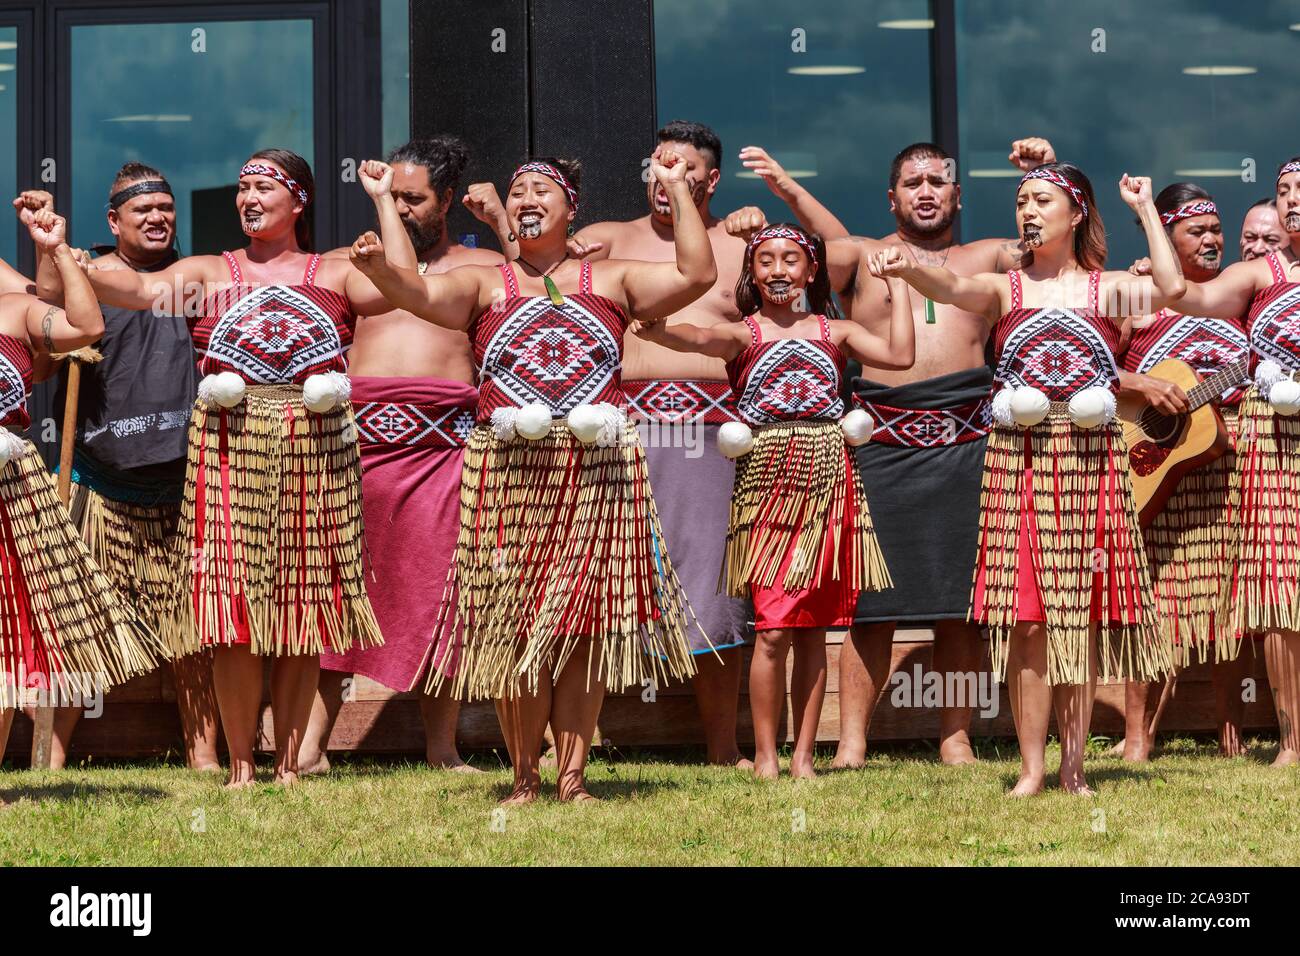 New Zealand Maori People High Resolution Stock Photography And Images Alamy